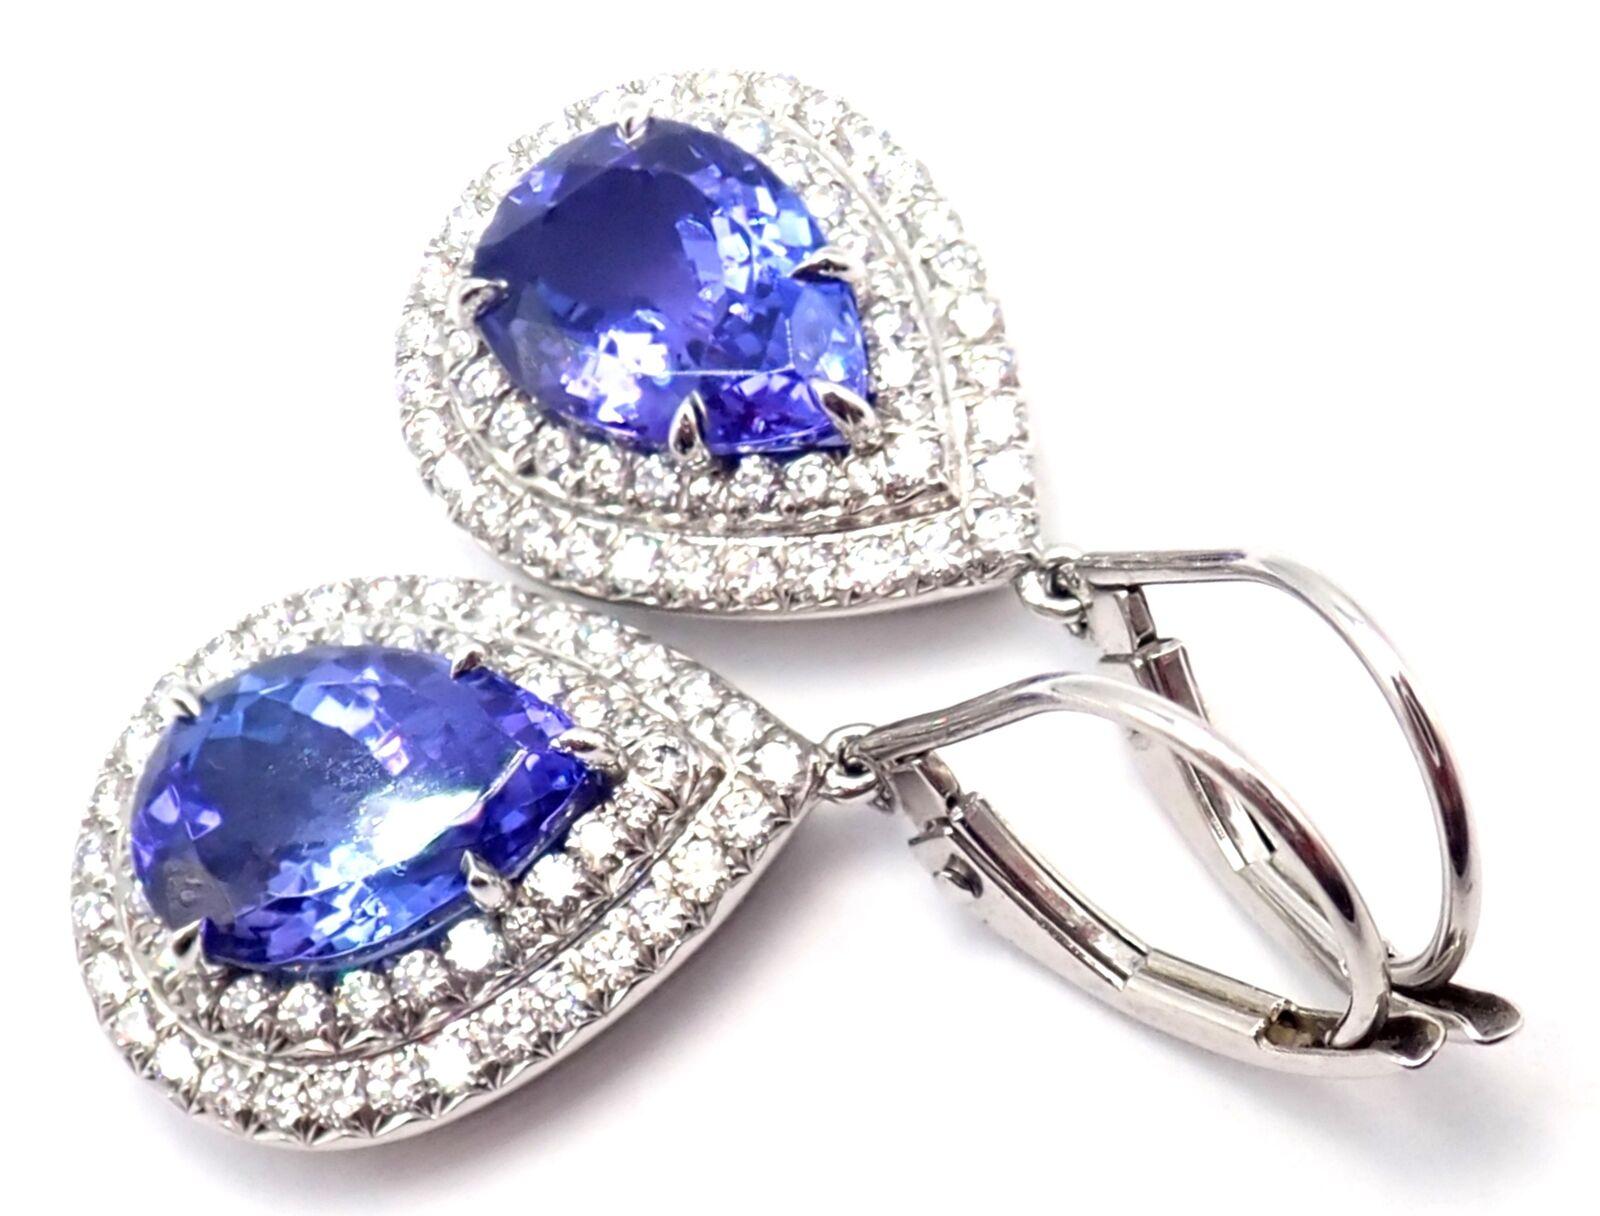 Platinum Diamond Tanzanite Drop Soleste Earrings by Tiffany & Co. 
With Round brilliant cut diamonds total weight approximately .51ct
2 pear shape tanzanites total weight approximately 2.50ct
These earrings are made for pieced ears.
Details: